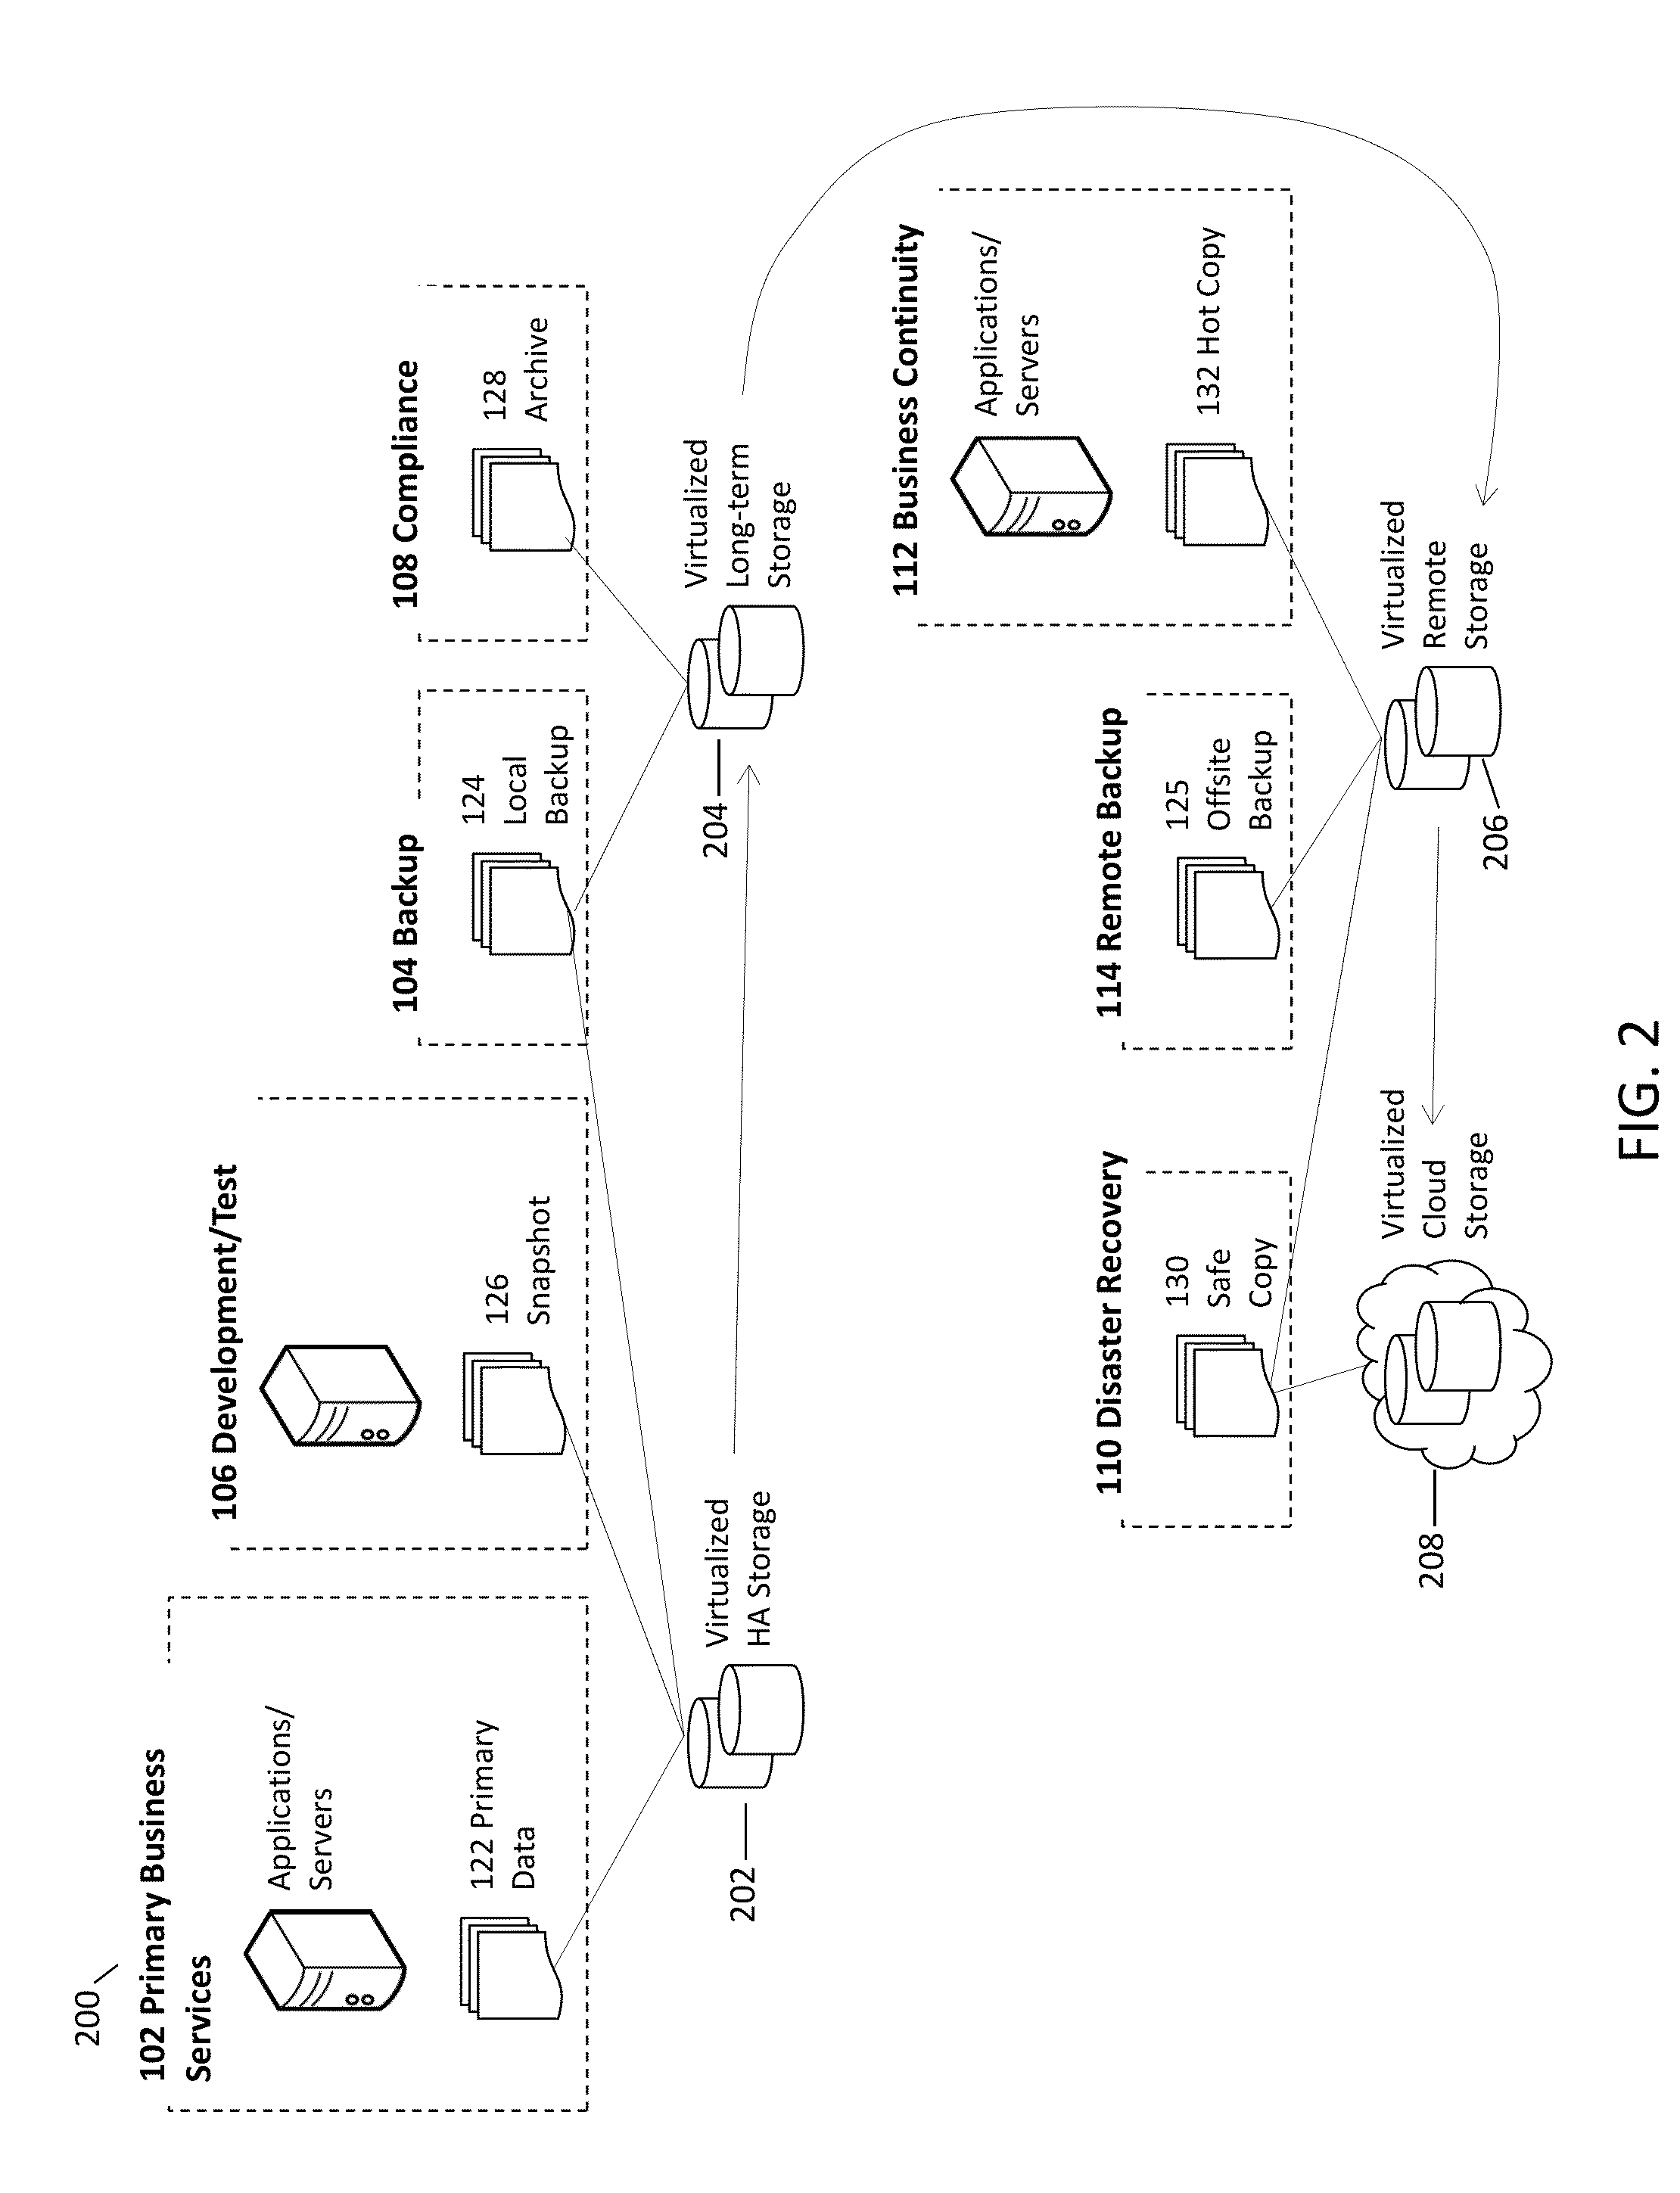 System and method for caching hashes for co-located data in a deduplication data store